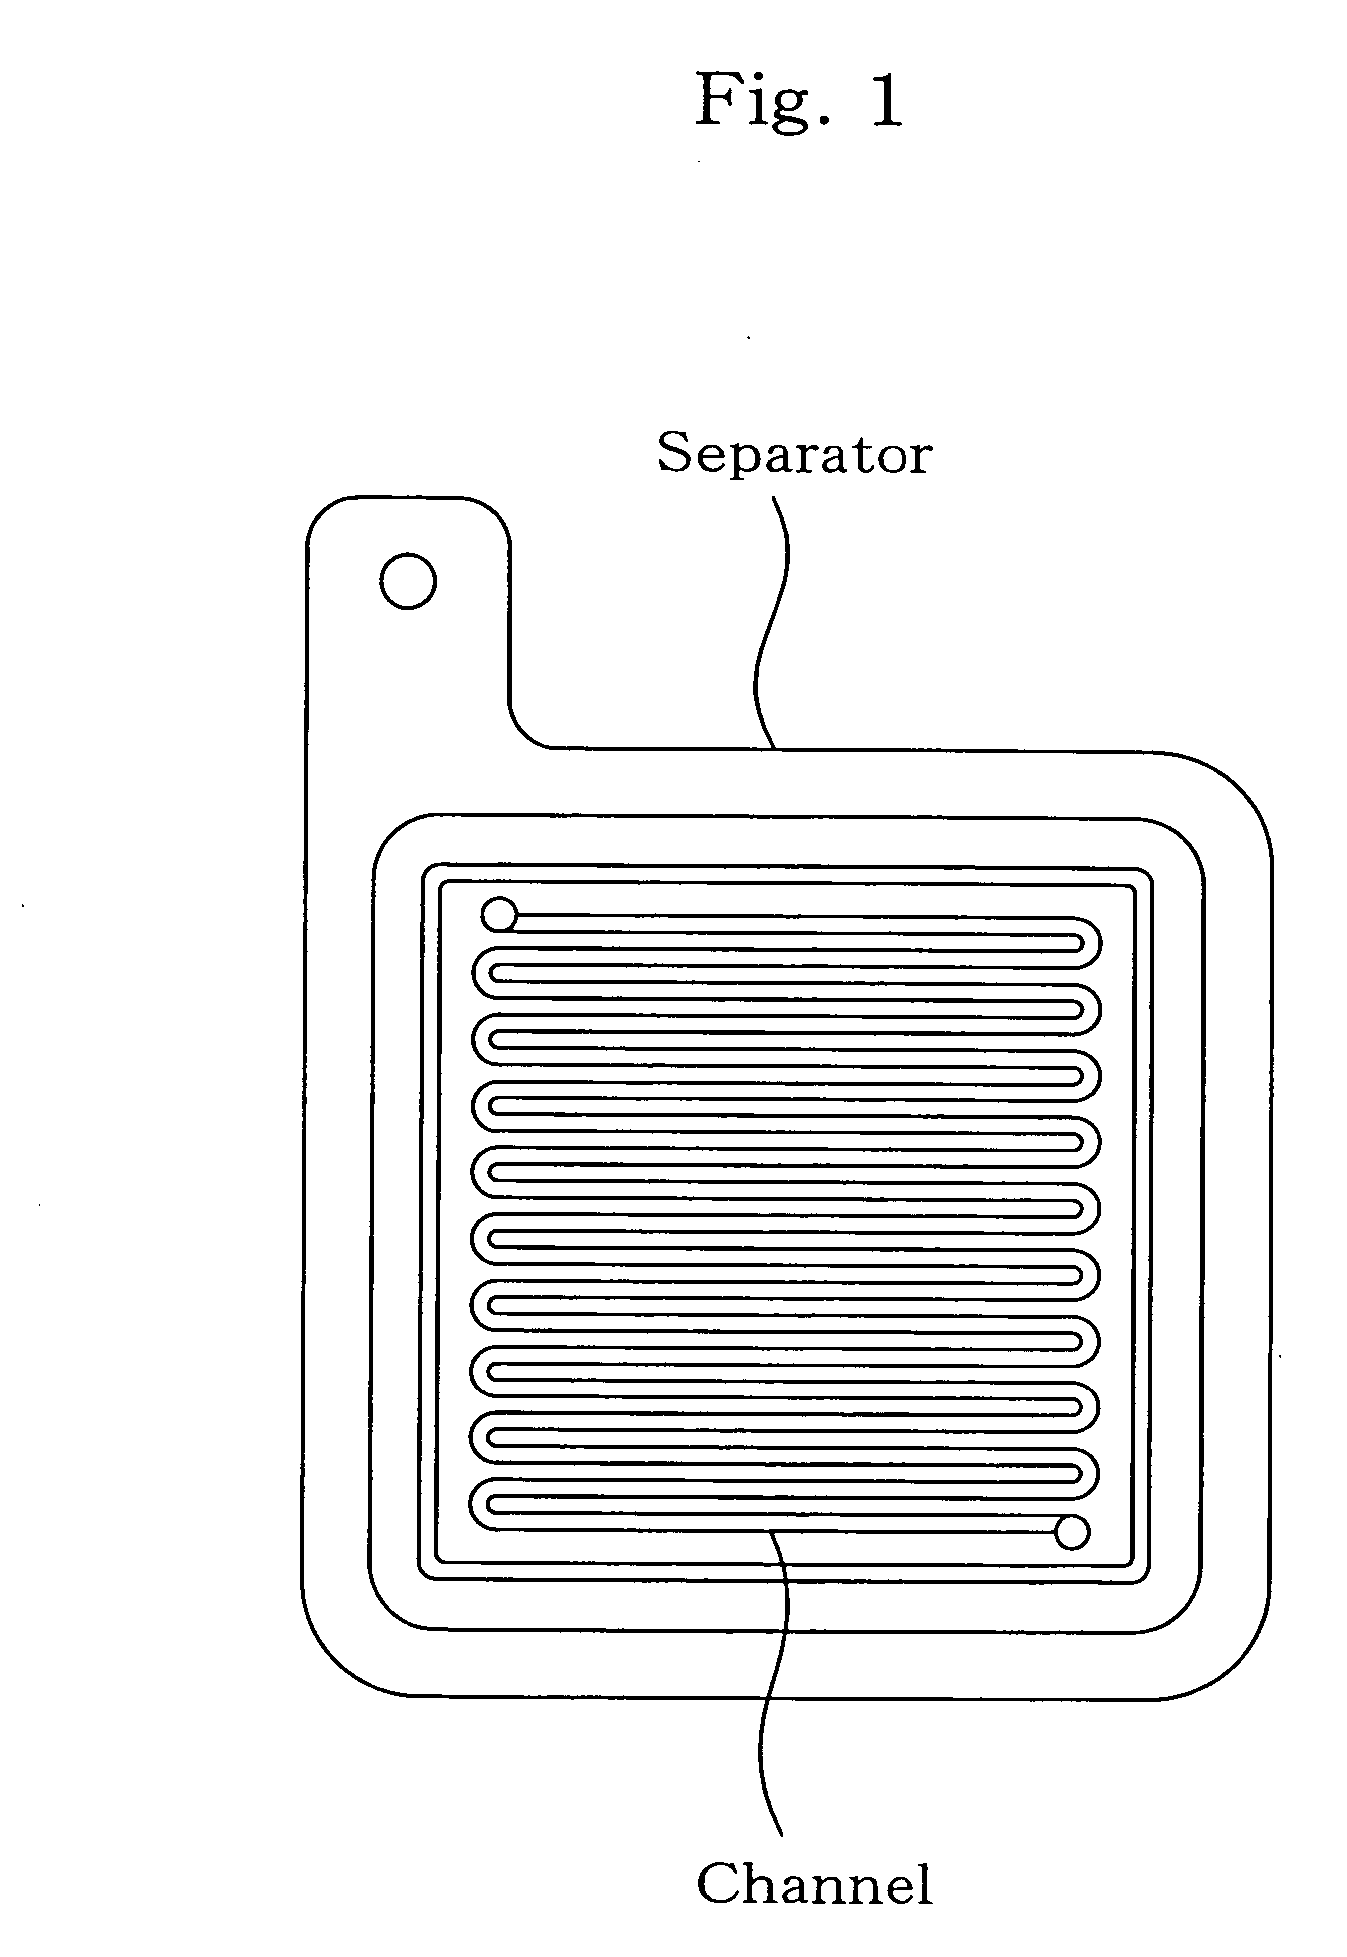 Separator for fuel cell, method for producing the same, and fuel cell using the same